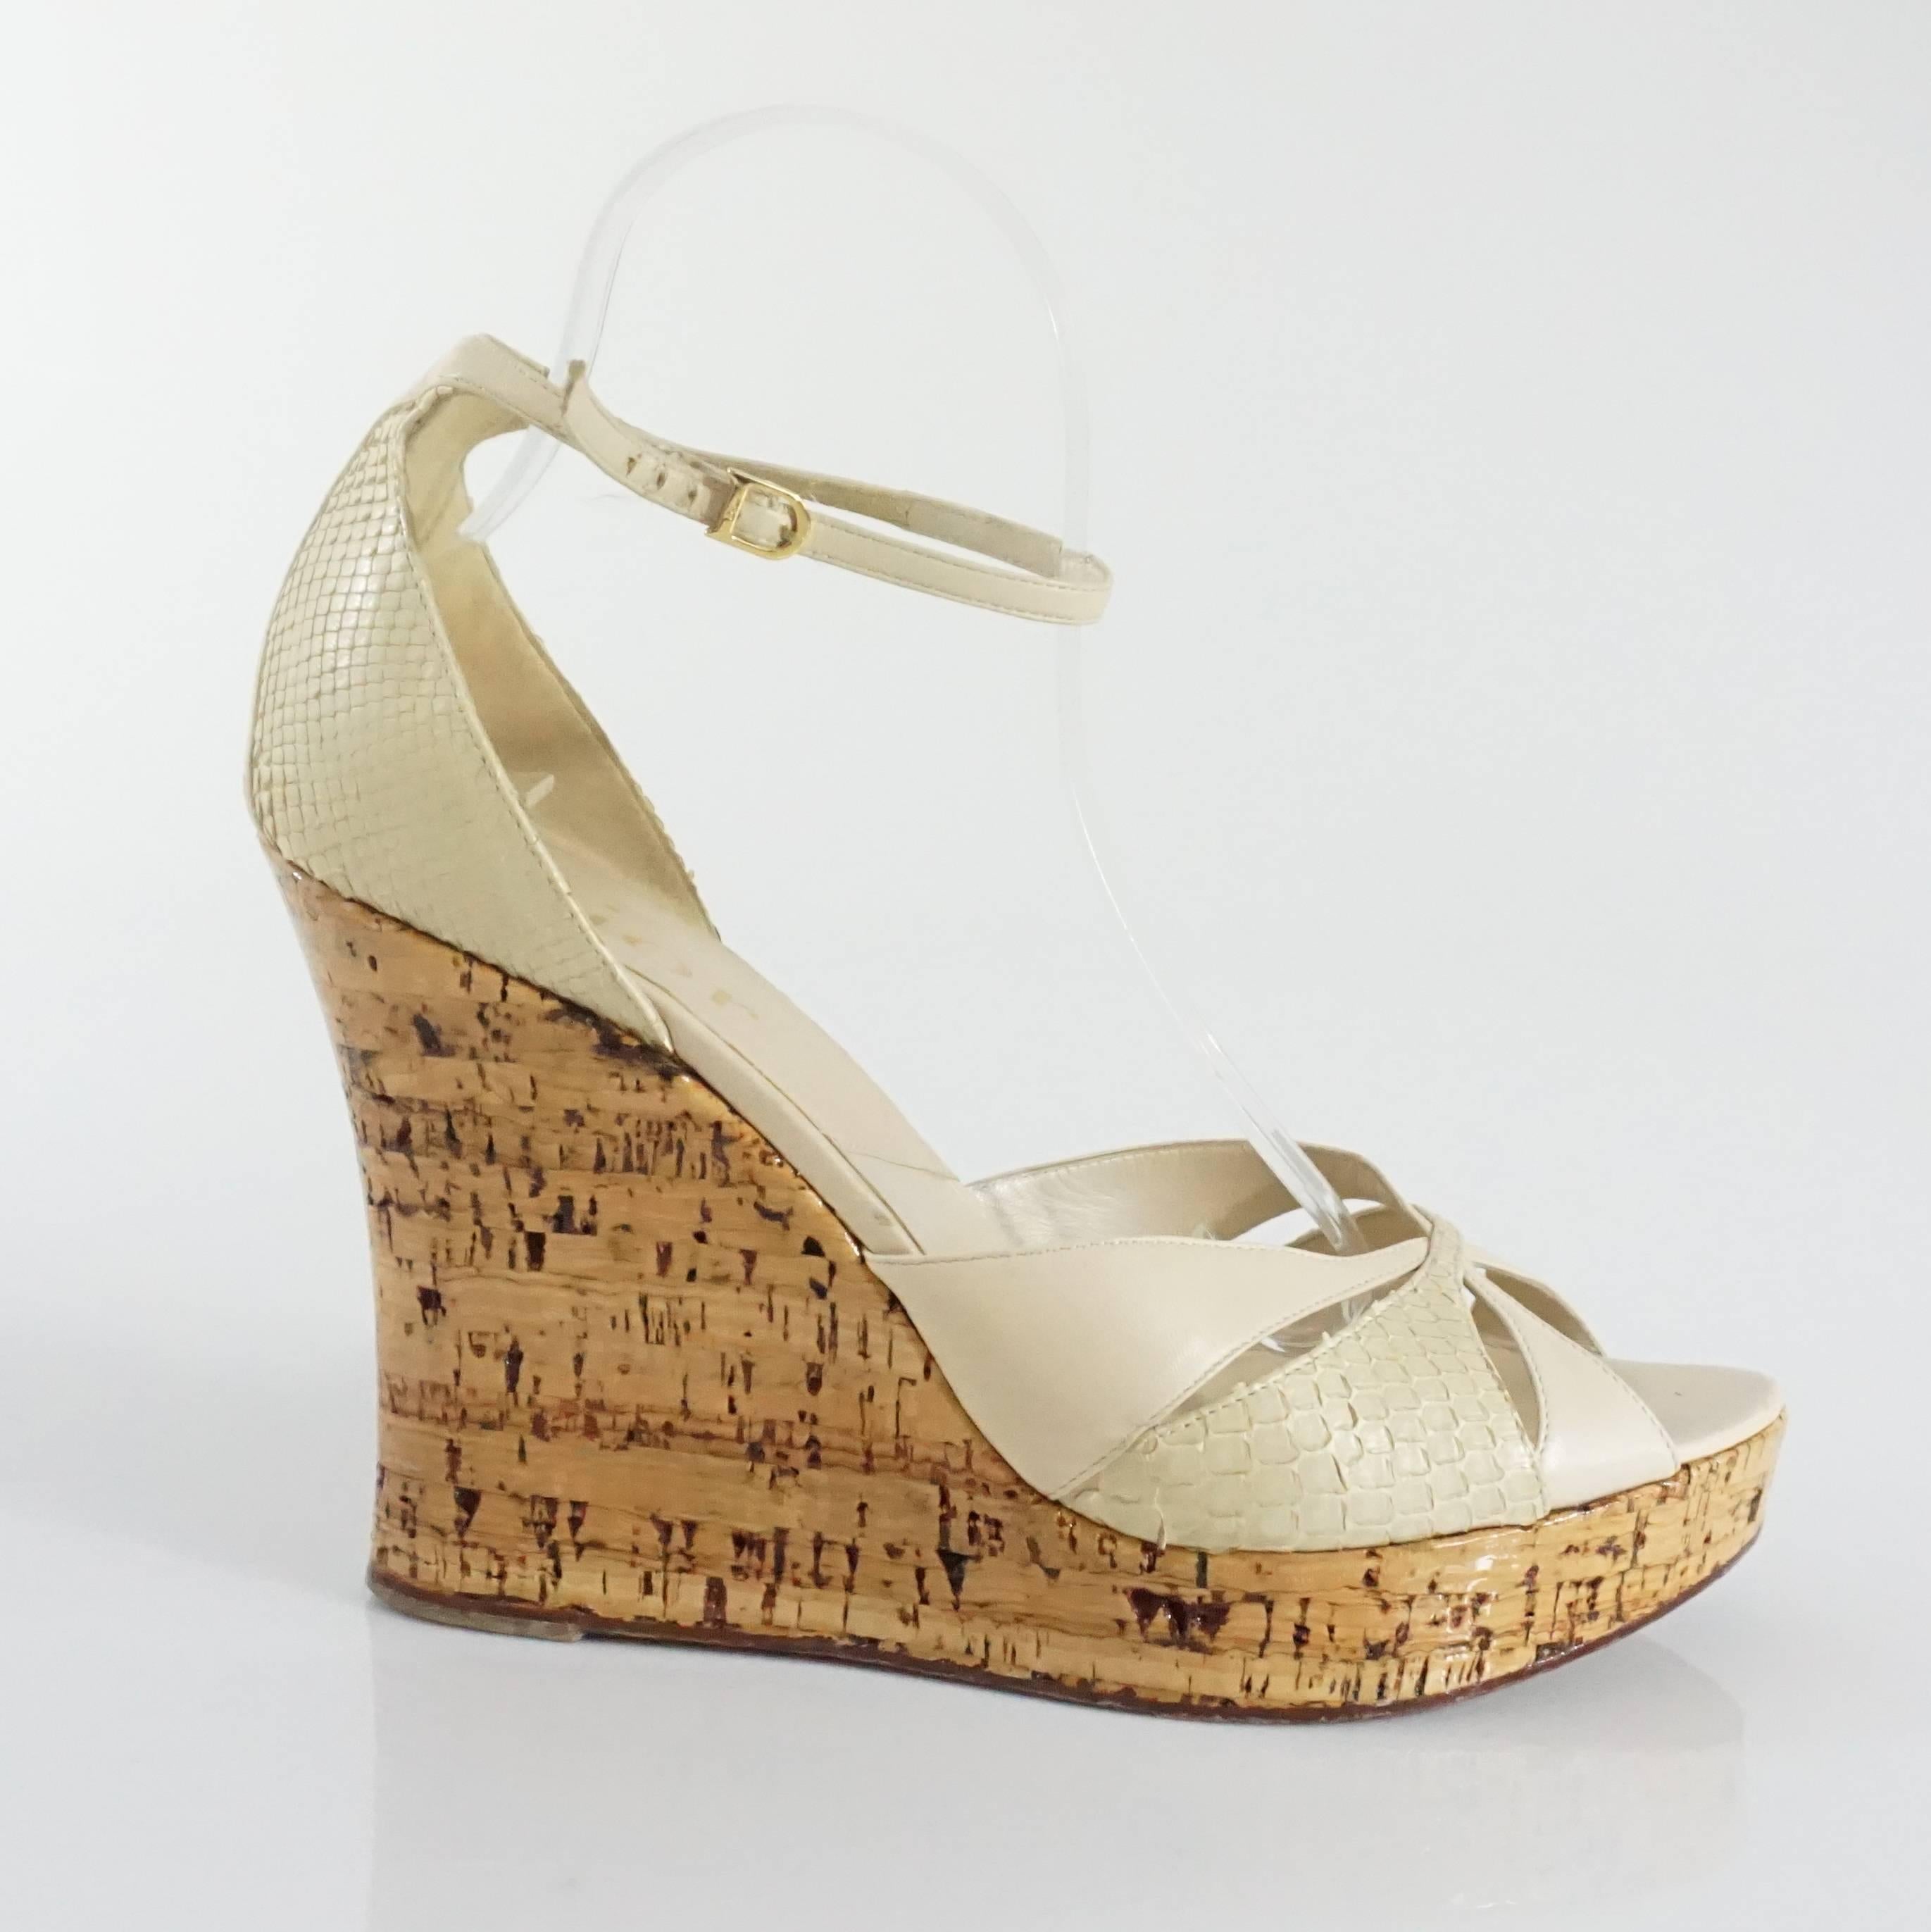 These Christian Dior cork wedges have beige straps. One of the straps have a snakeskin texture. The wedge is made to have a cork appearance. These wedges are in good condition with some scuffing. Size 42.

Wedge Height: 4.88"
Platform: